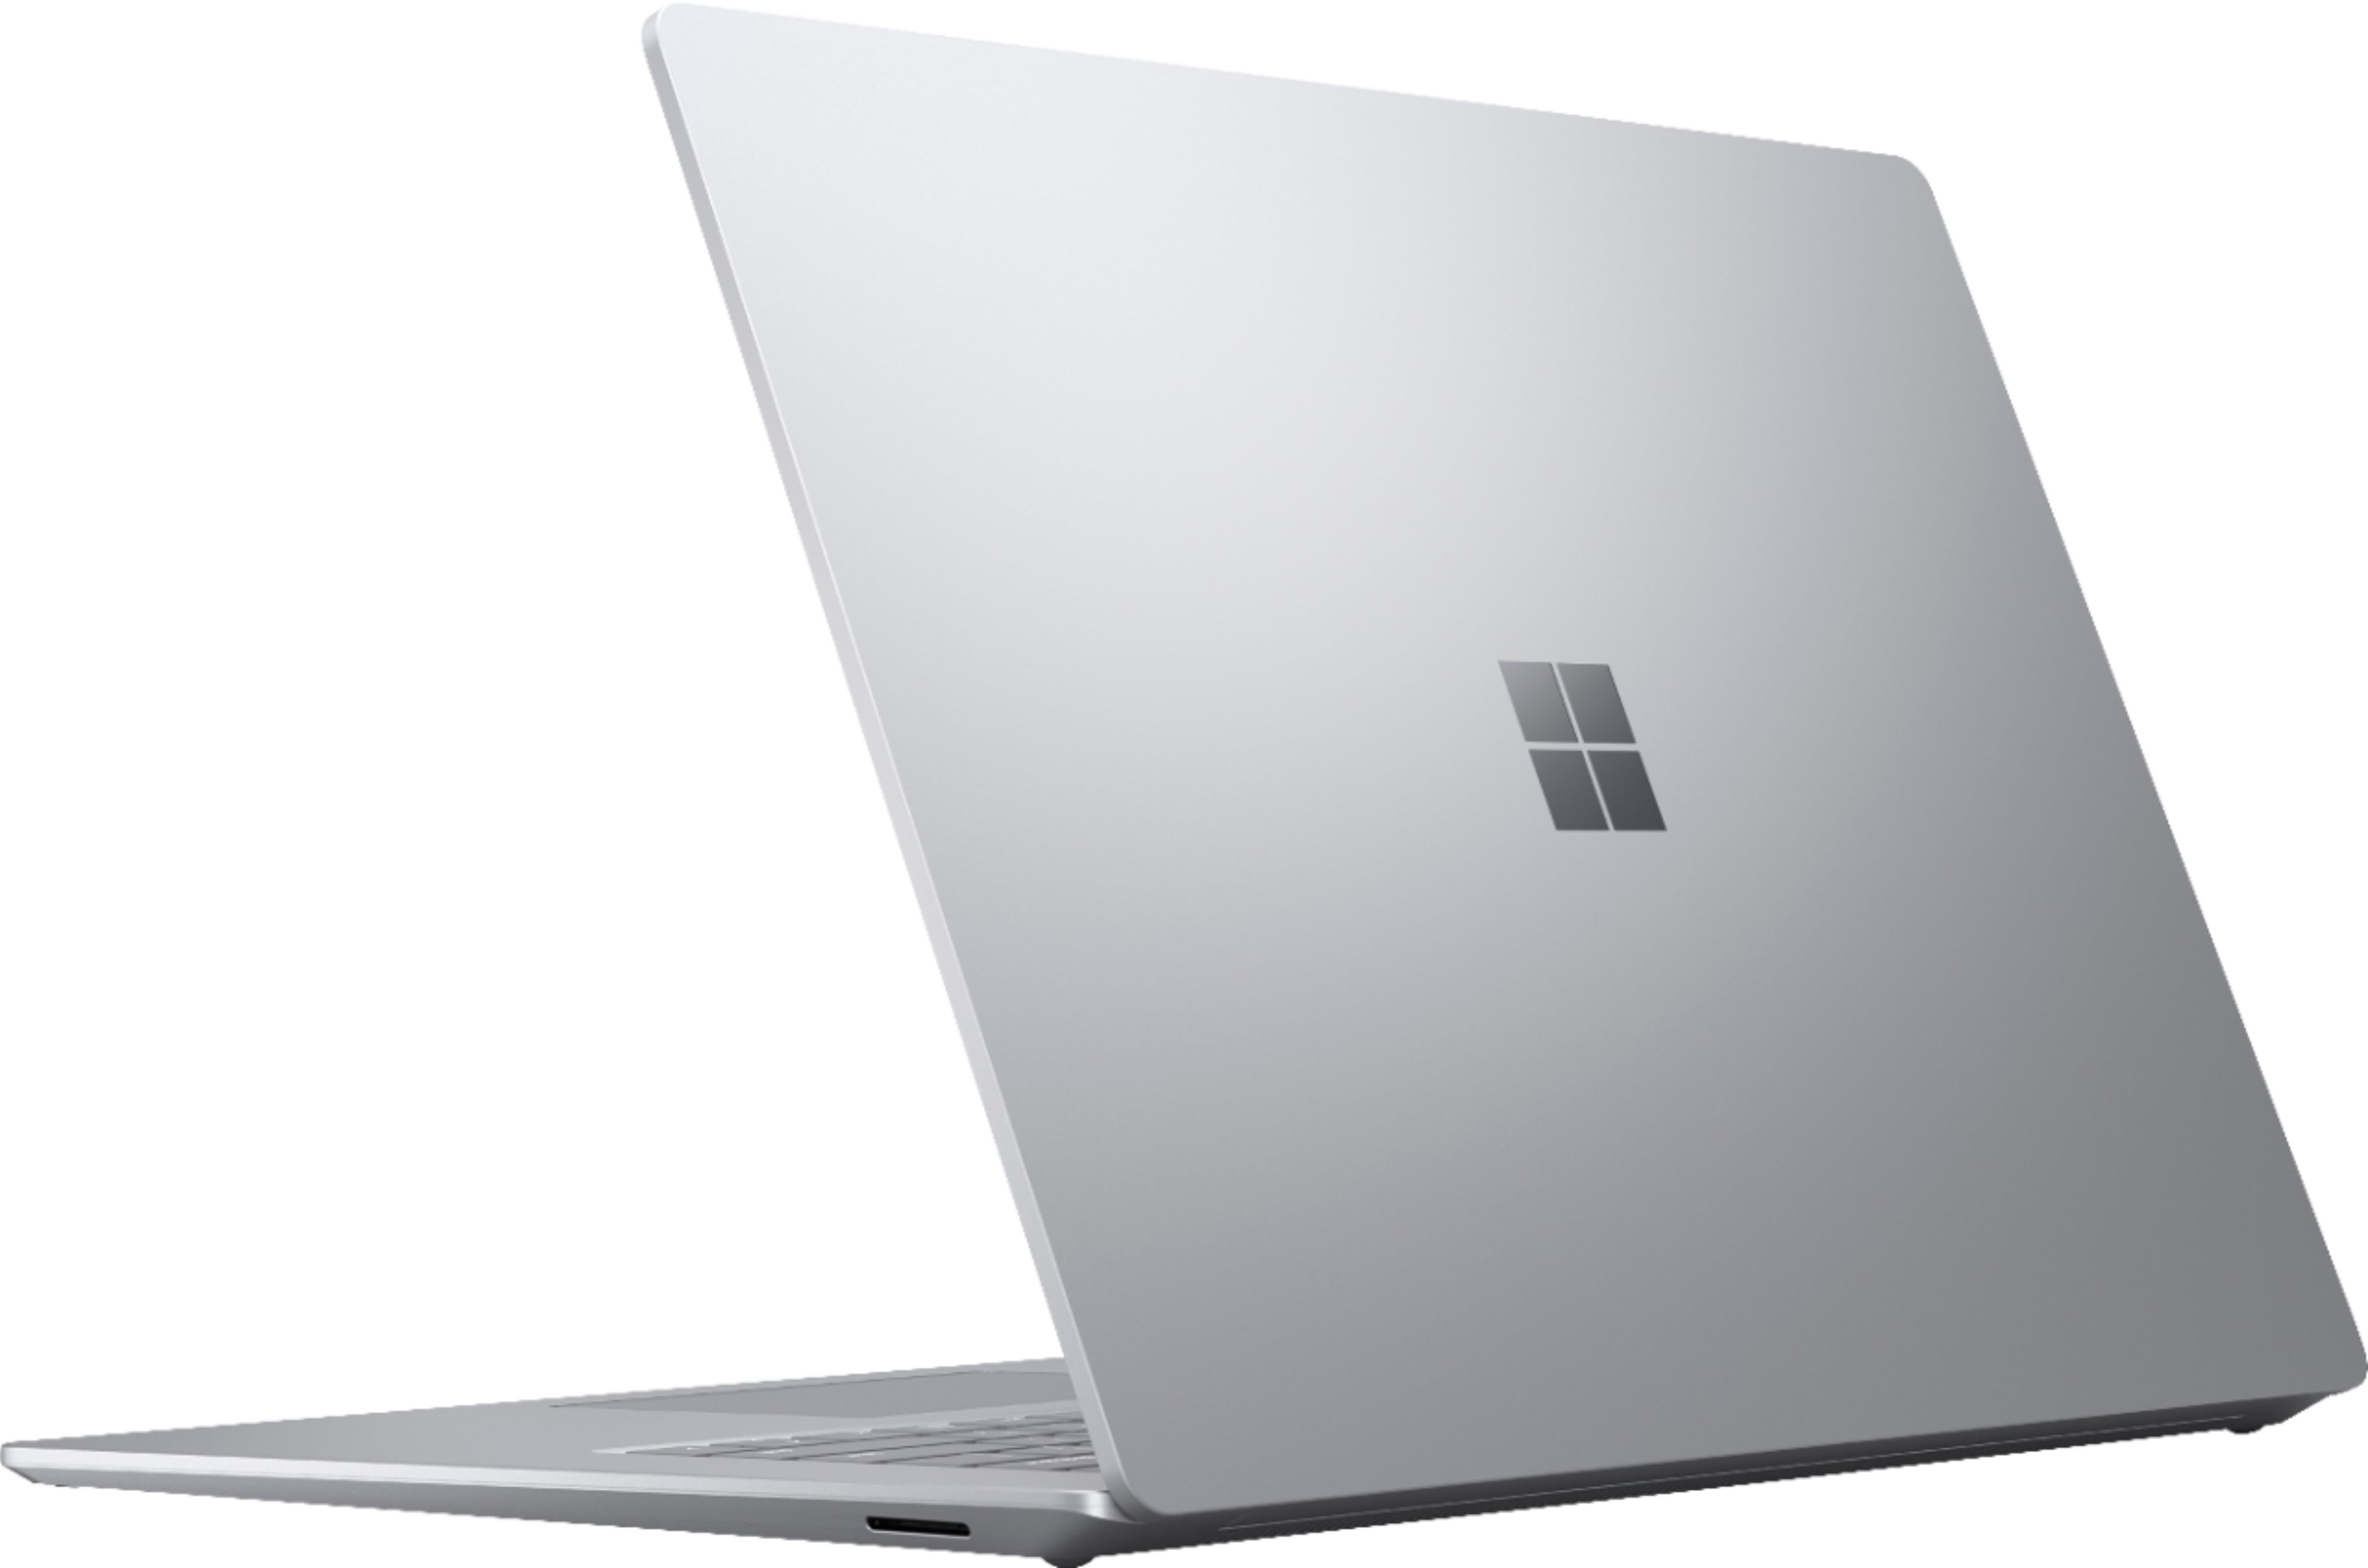 Microsoft Surface Laptop 3 (13.5”) Dimensions & Drawings